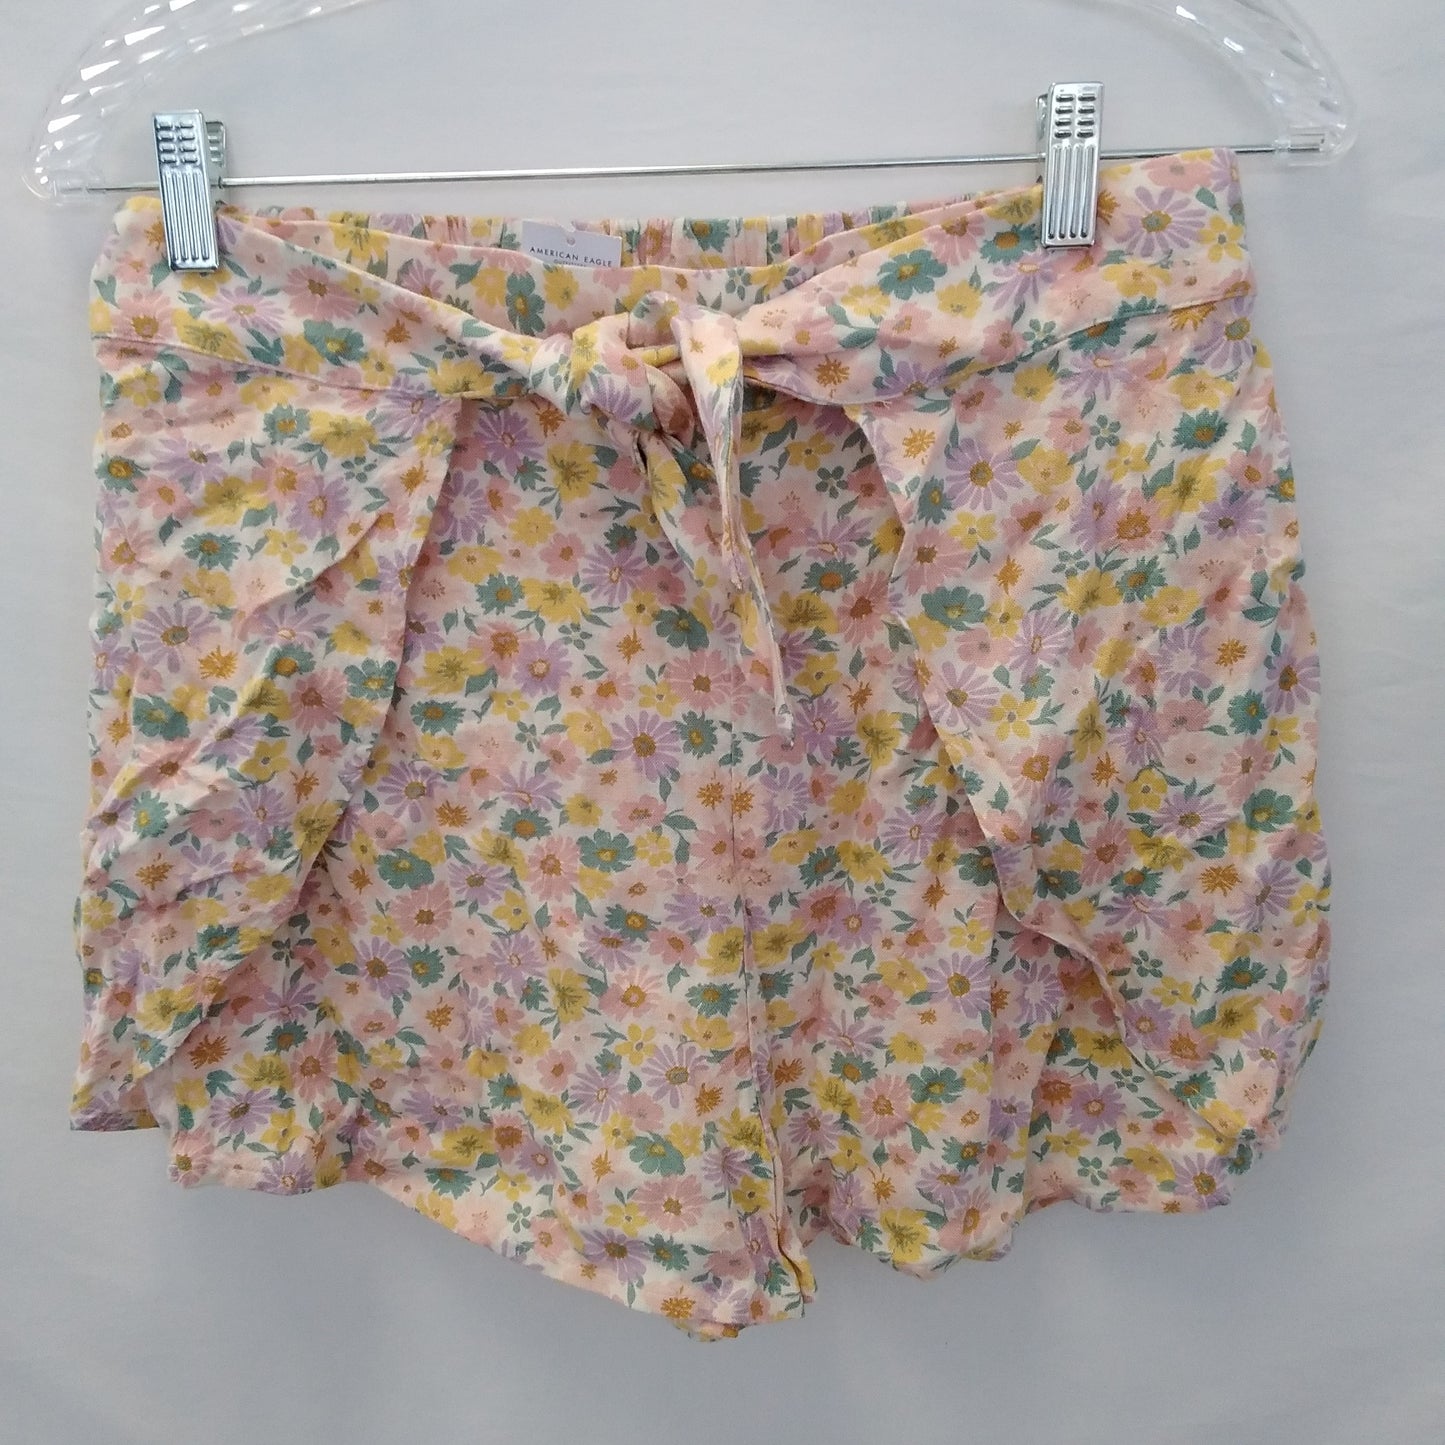 NWT - American Eagle Women's Yellow/Pink Floral Shorts - Size: S